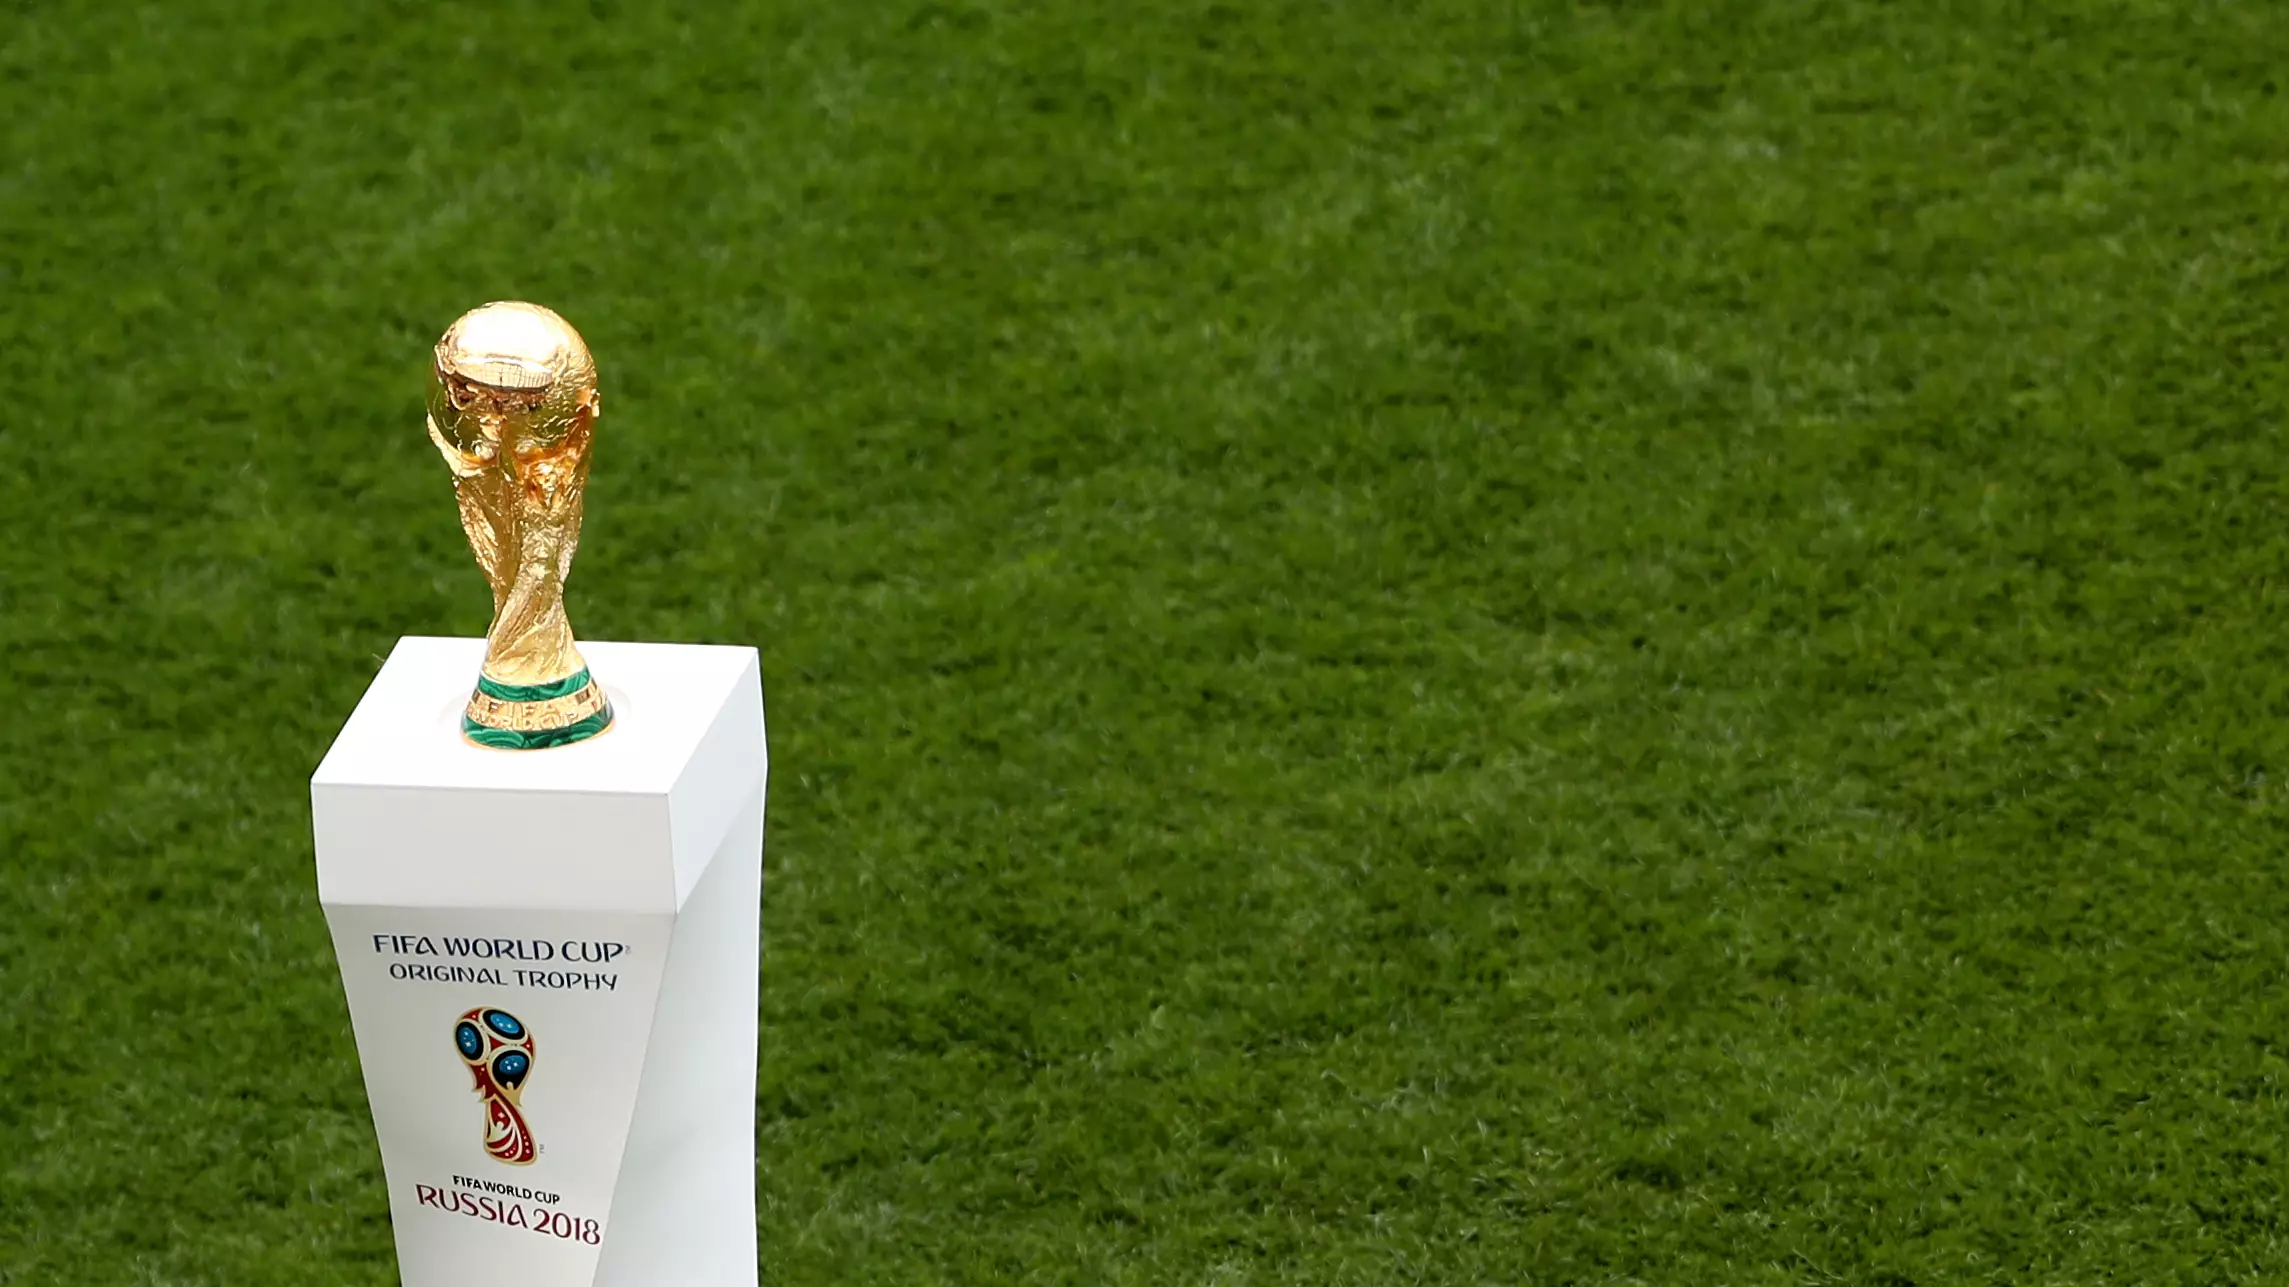 England's Odds For Winning The World Cup Tops France, Portugal and Argentina